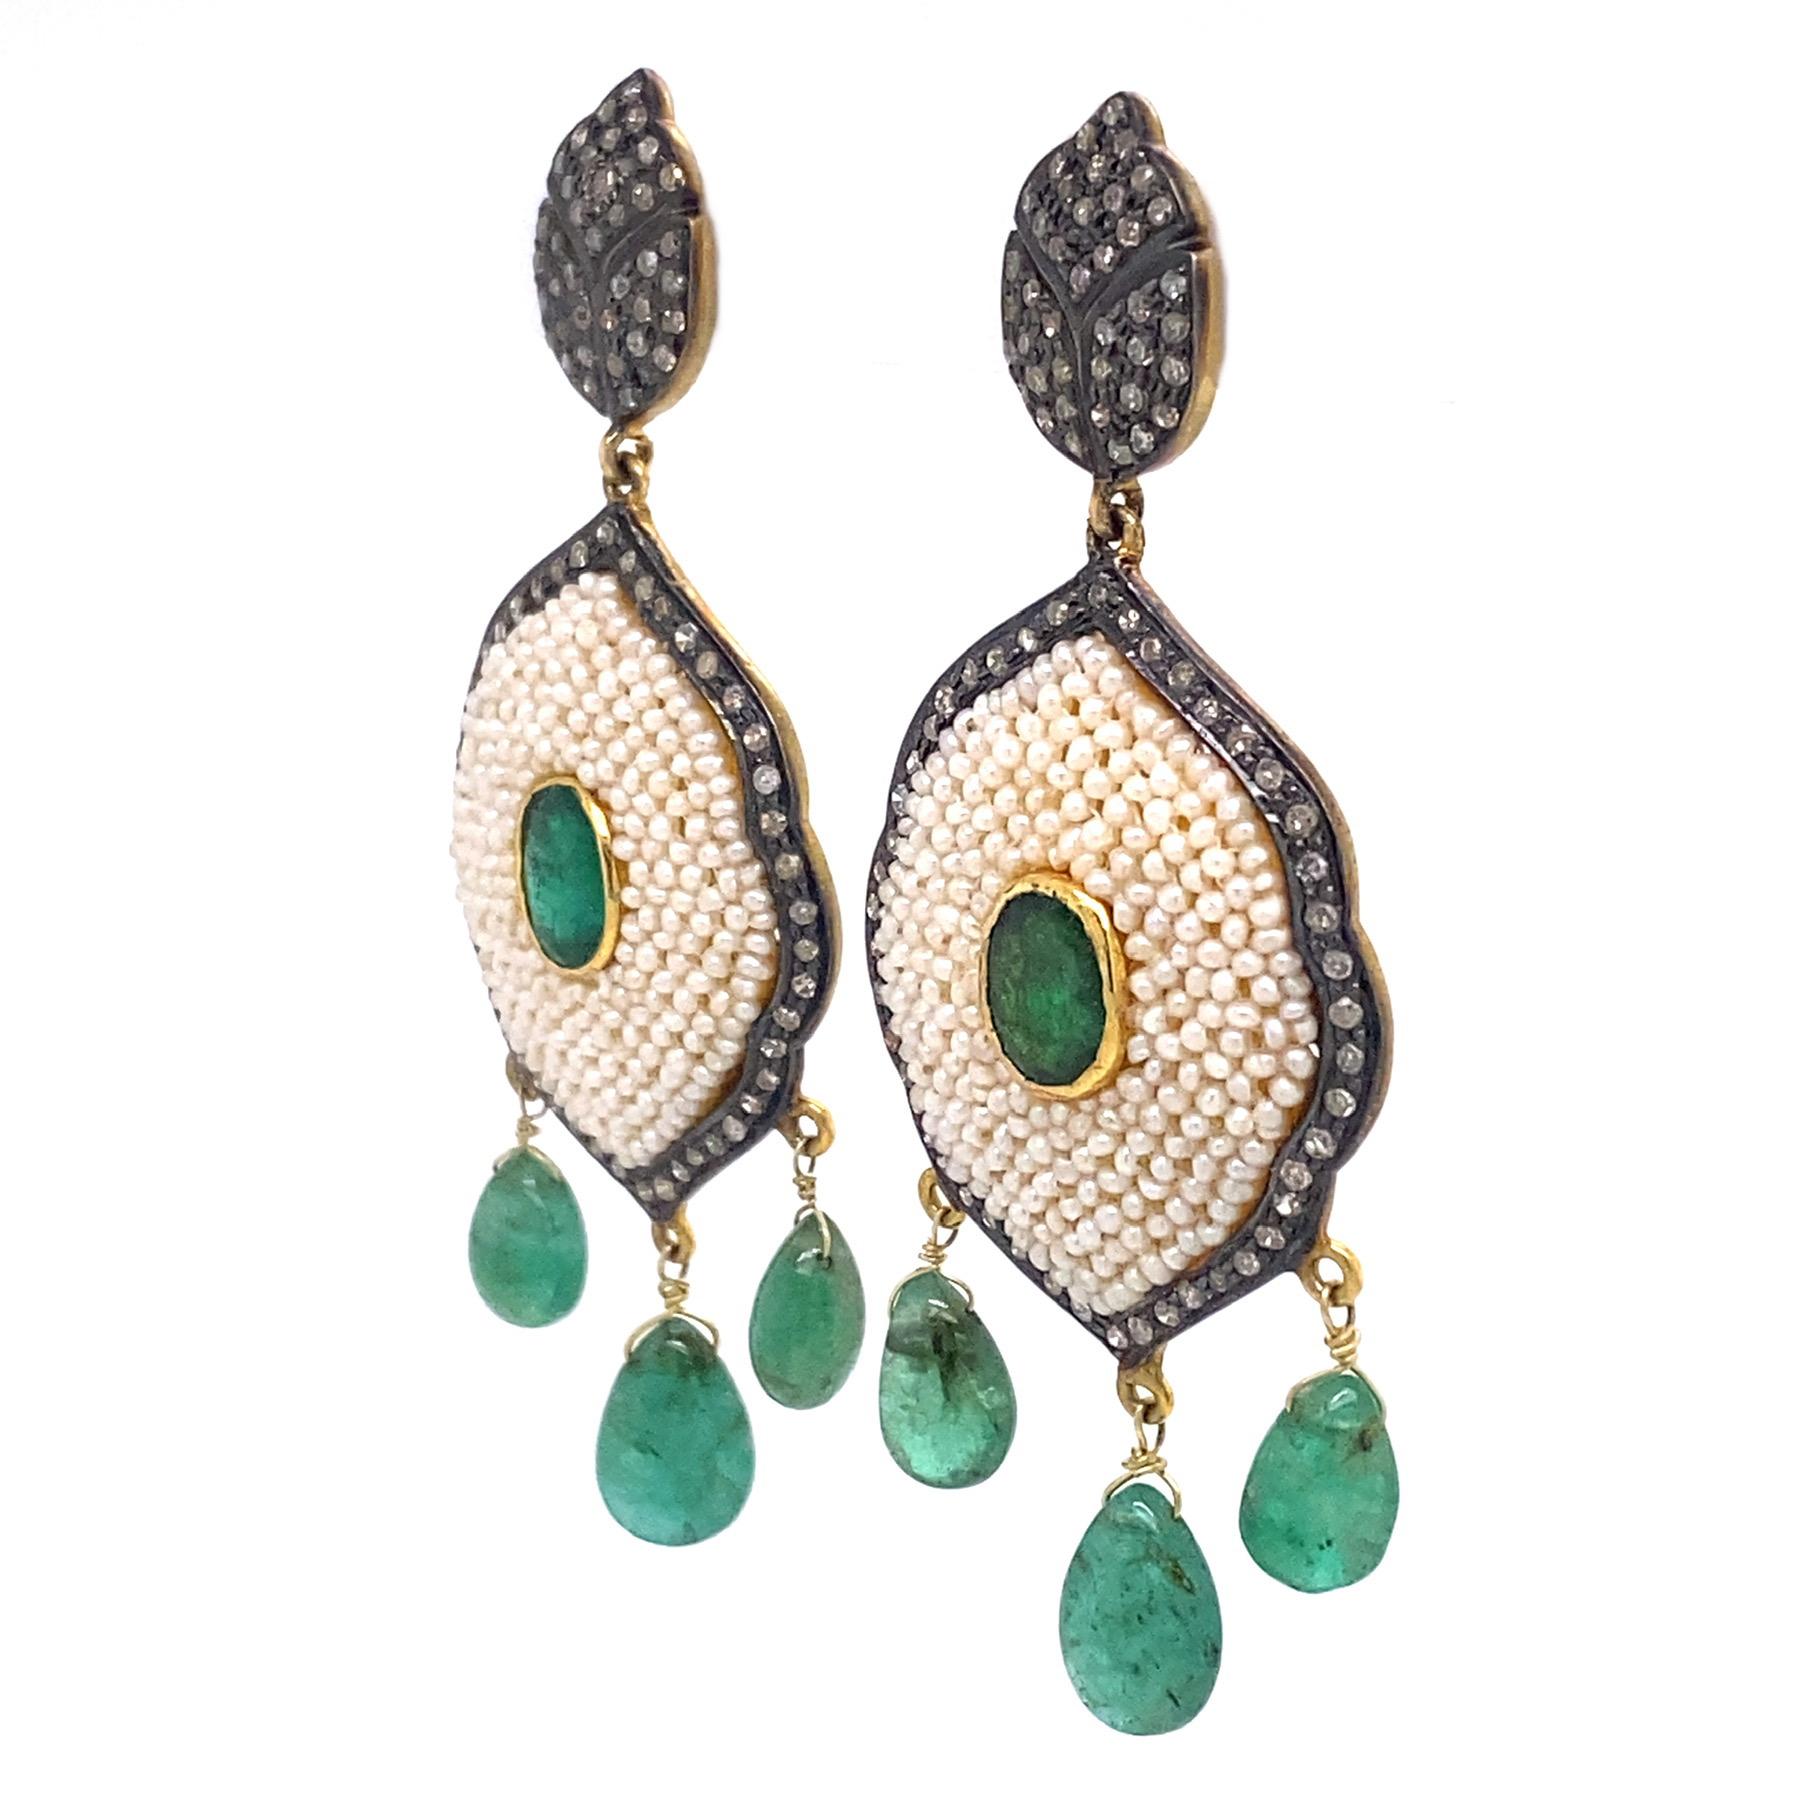 Rustic Collection 

Rustic Diamonds with Emeralds and Seed Pearl chandelier earrings set in sterling silver and 14K gold plating. 

Emeralds: 2.47ct total weight.
Diamonds: 1.62ct total weight.
